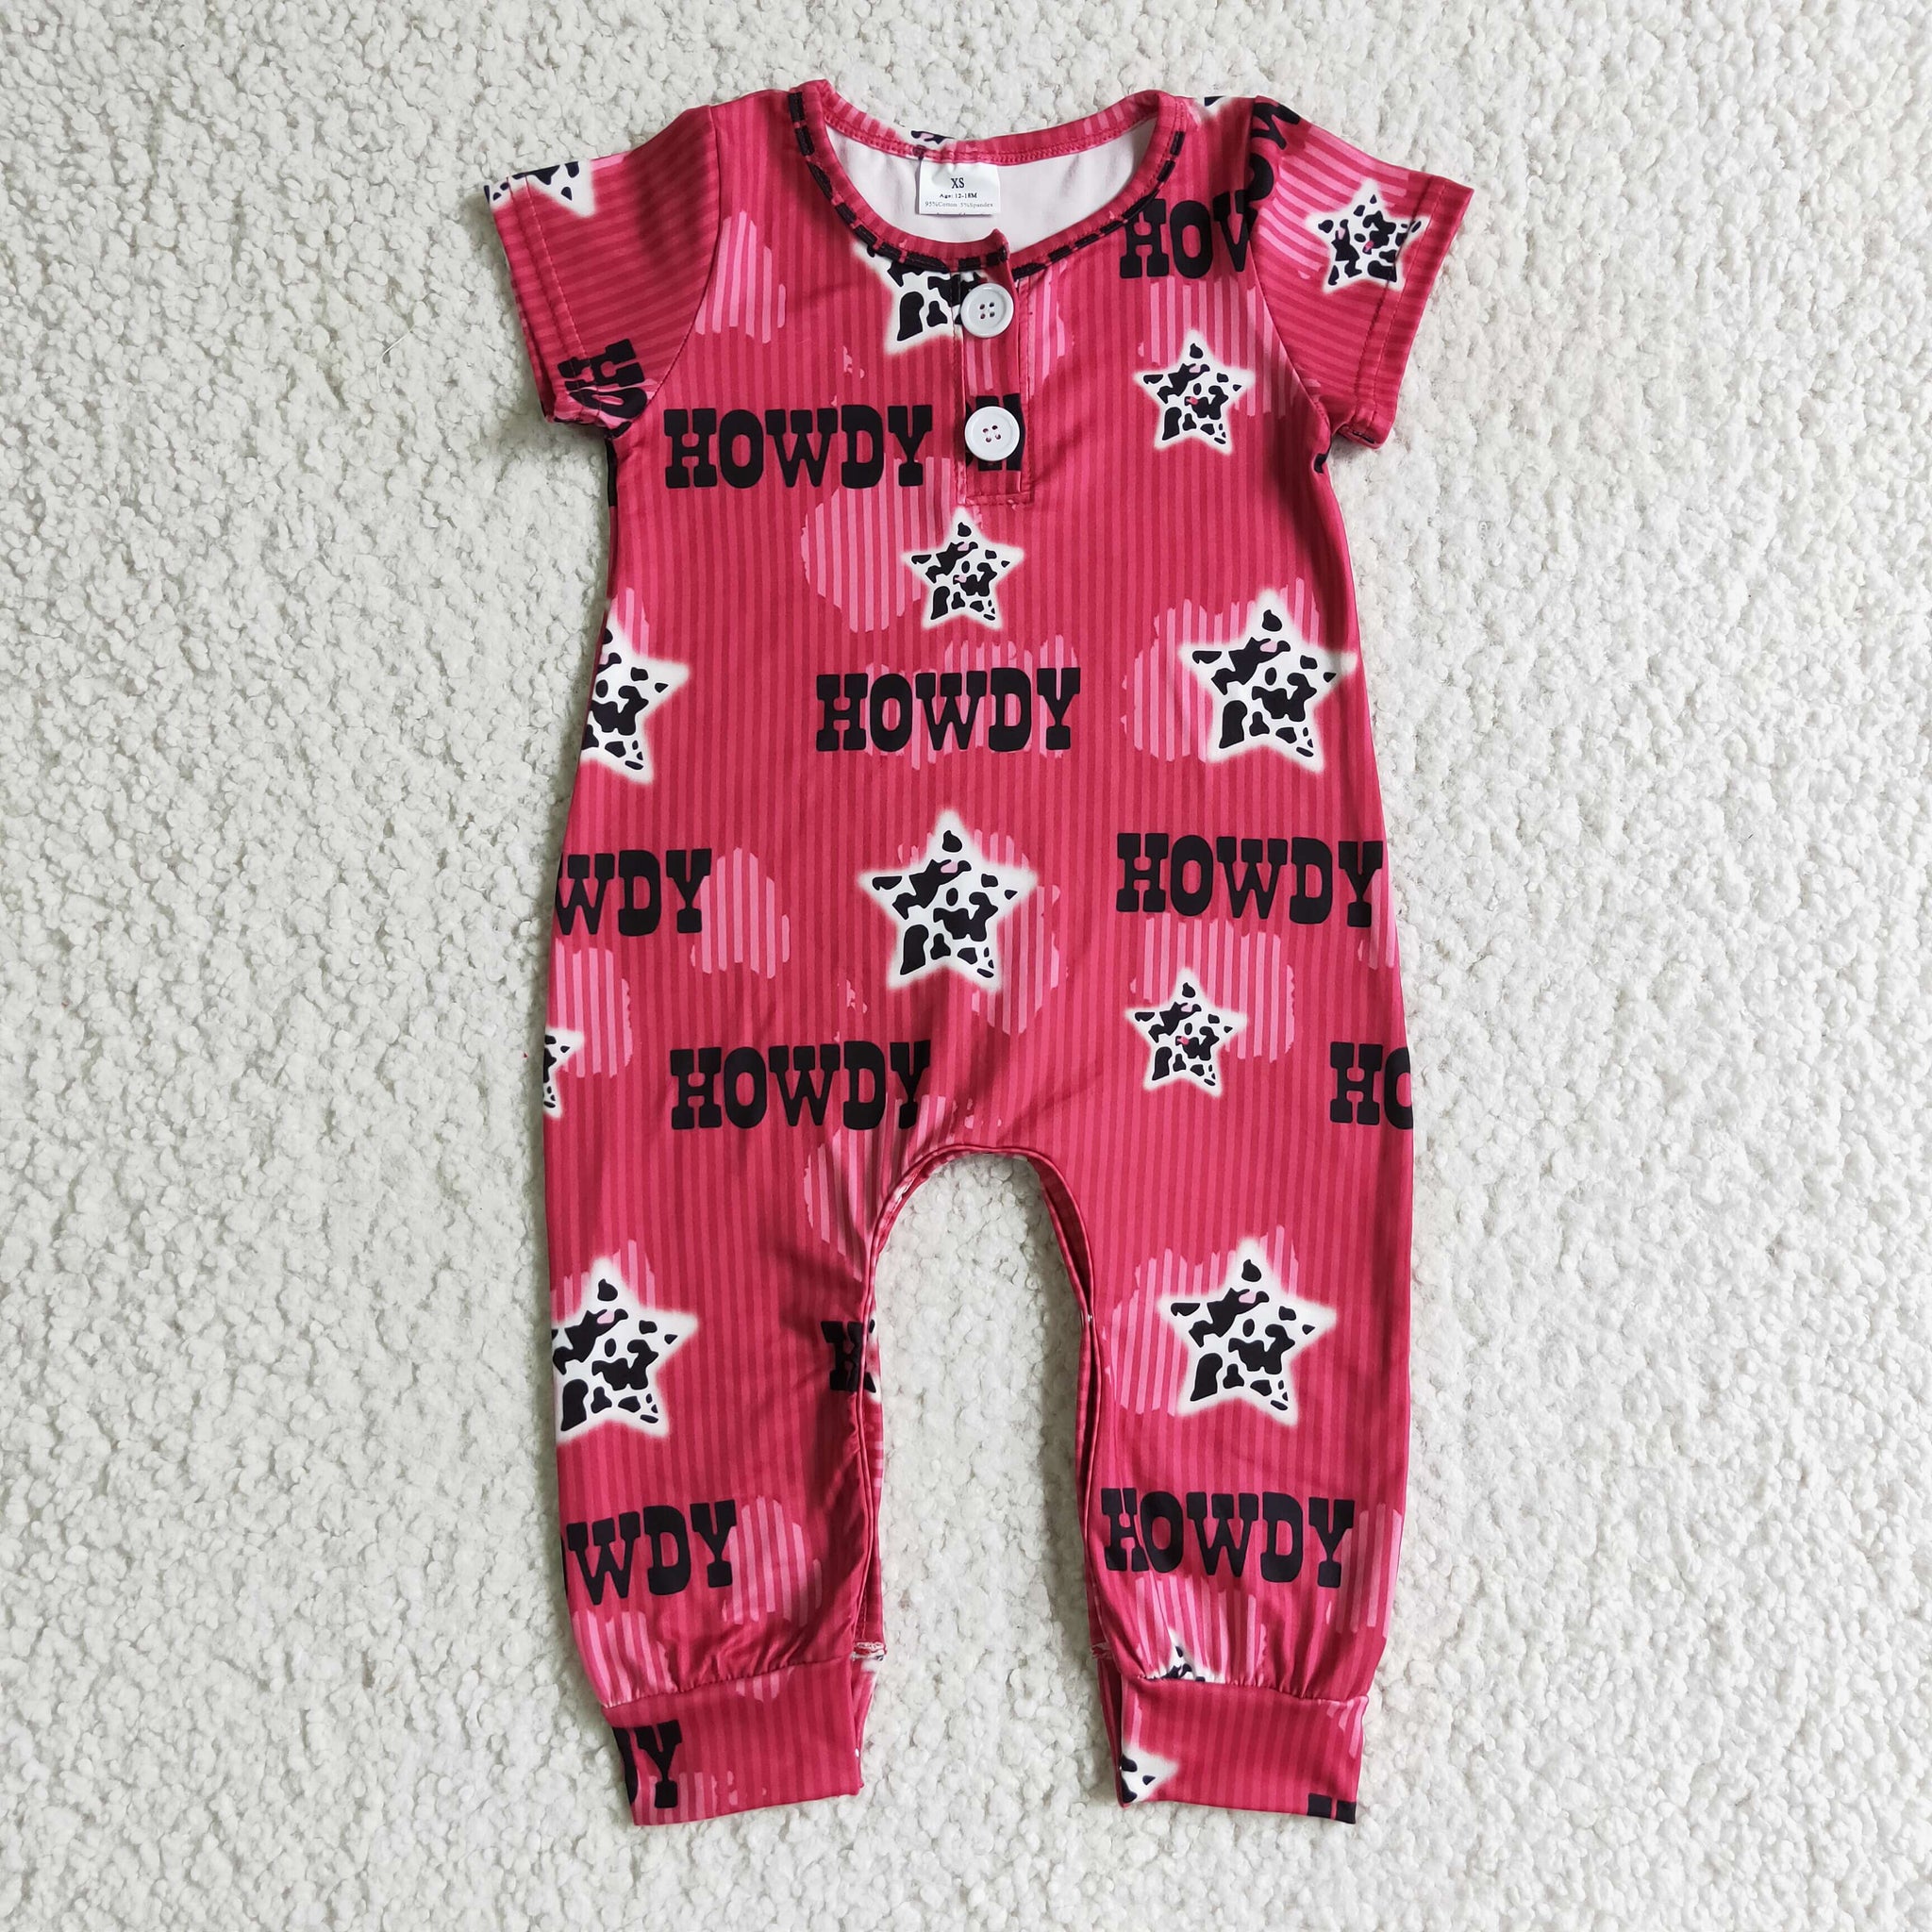 SR0073 howdy baby clothes short sleeve romper